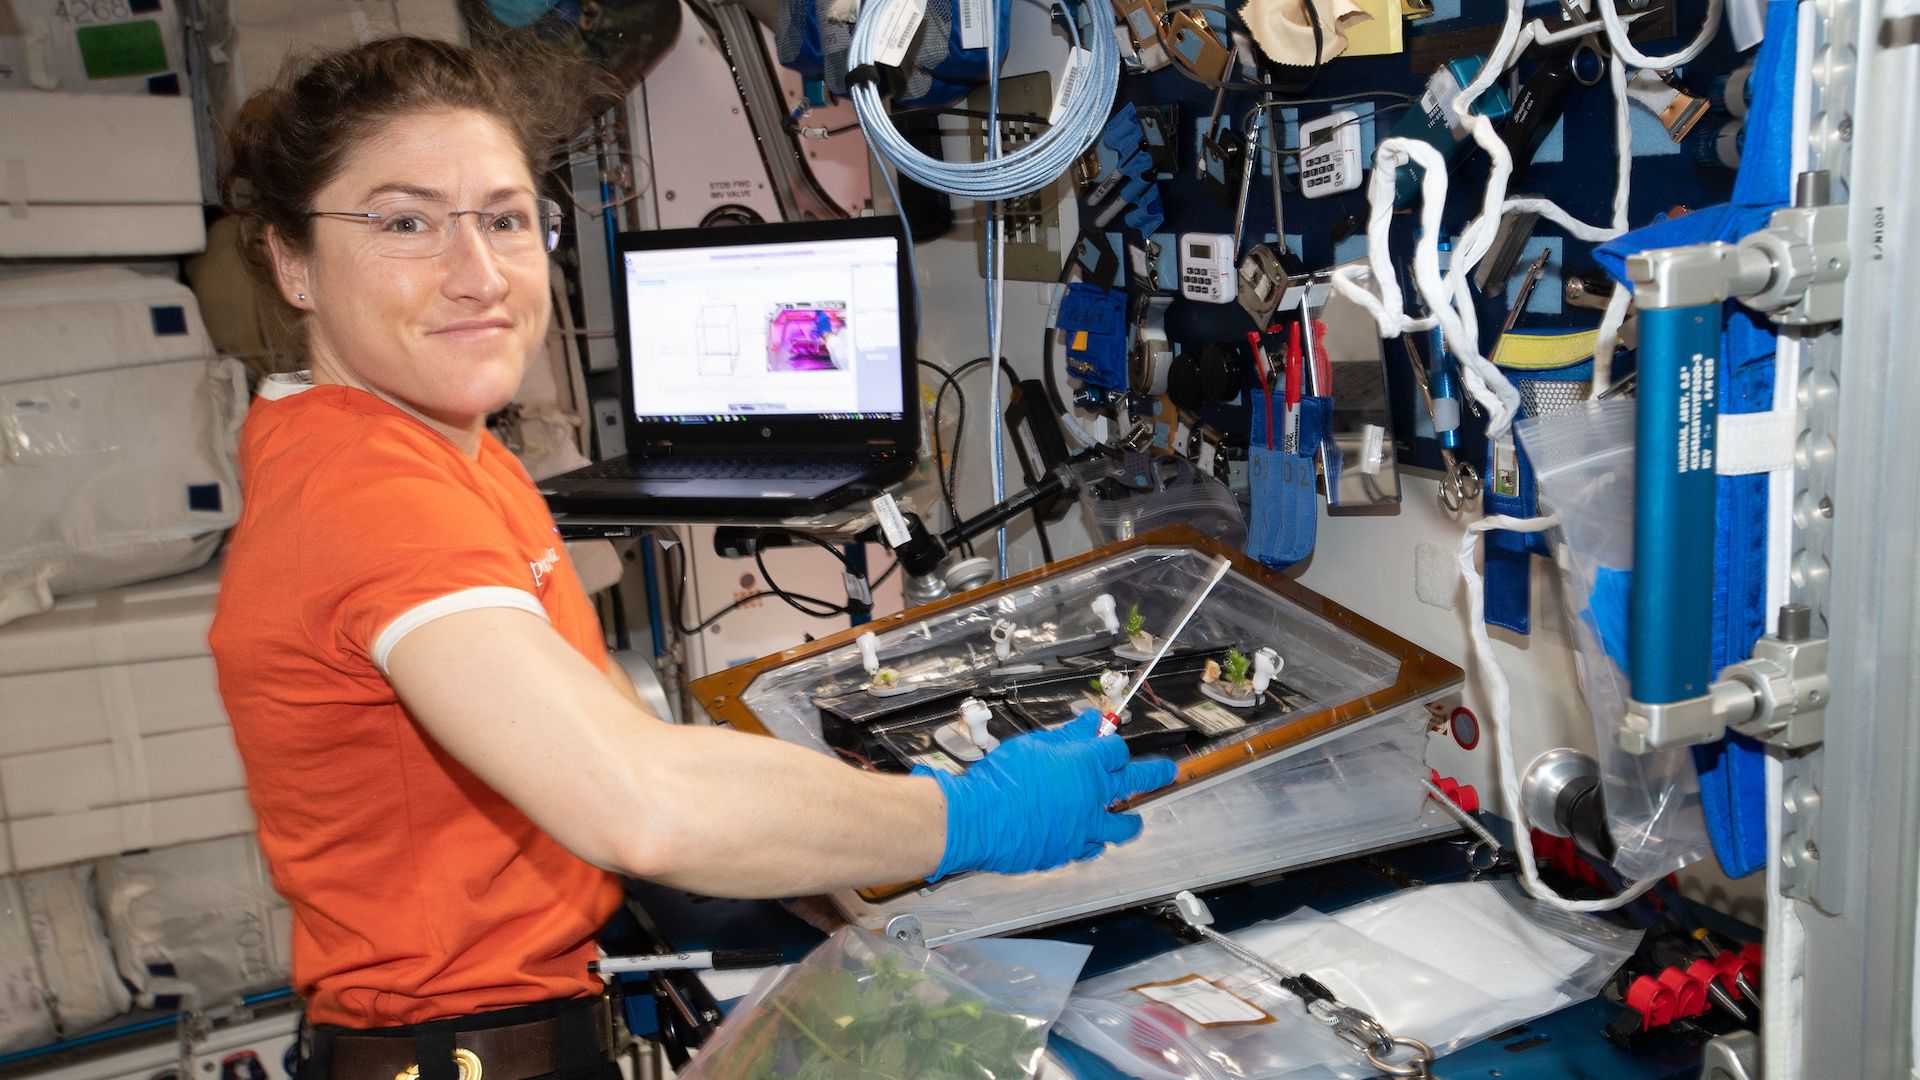 NASA astronaut Christina Koch performing an experiment on the International Space Station